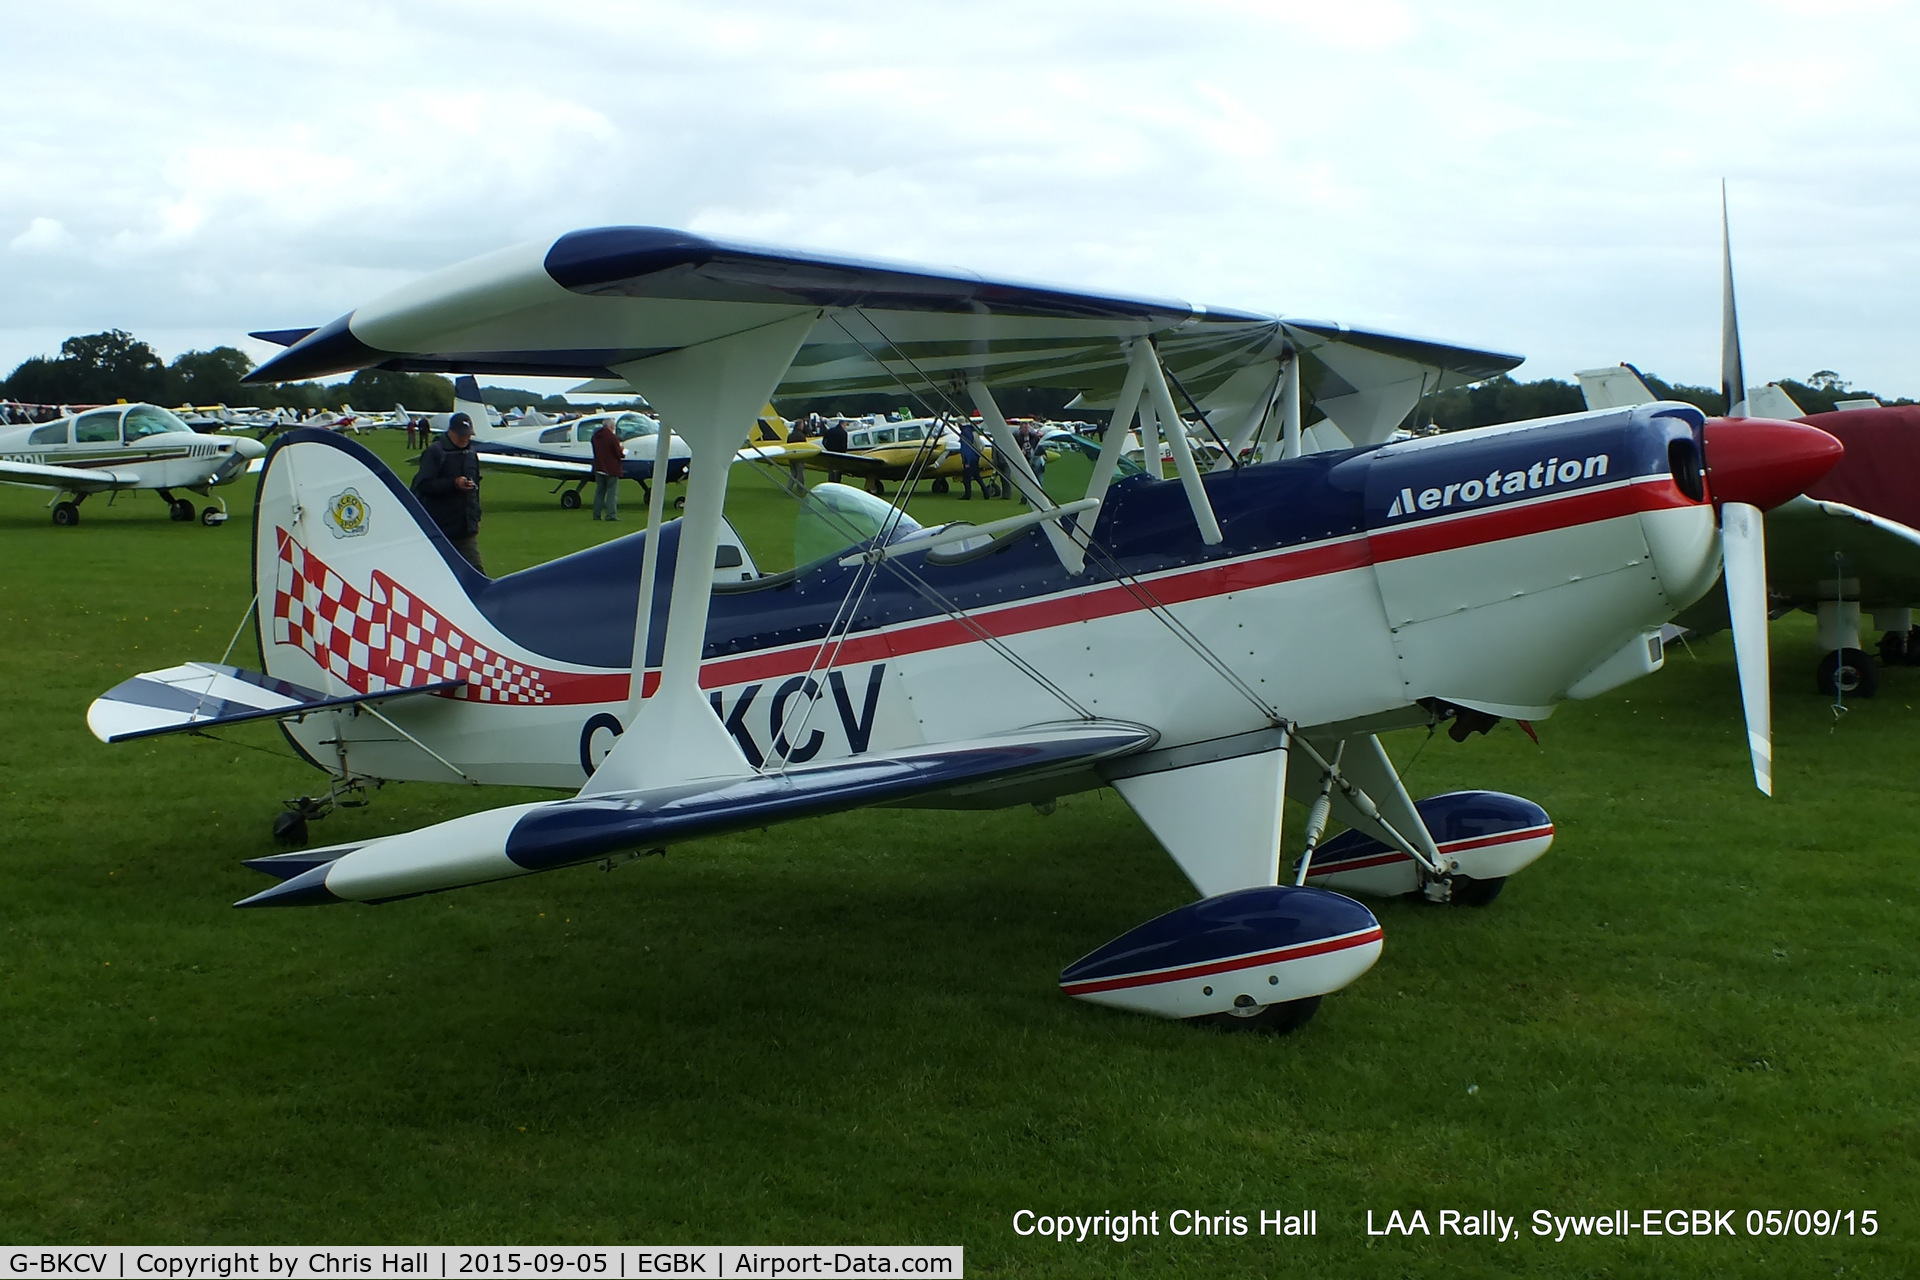 G-BKCV, 1990 EAA Acro Sport II C/N PFA 072A-10776, at the LAA Rally 2015, Sywell